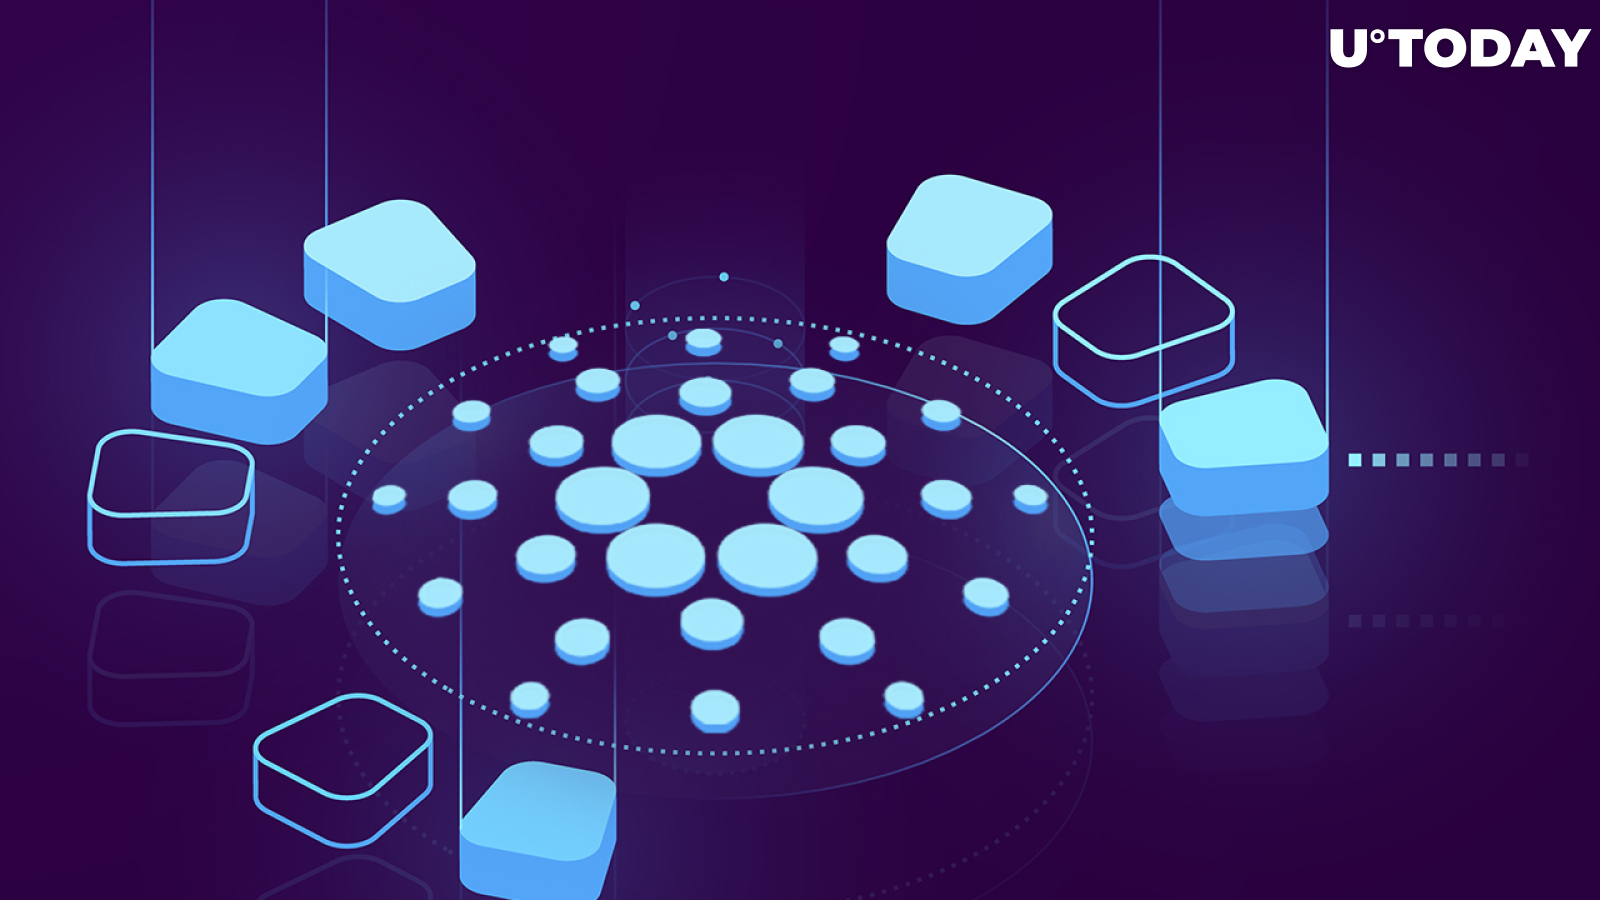 Cardano (ADA) Ecosystem Onboards Over 1,000 dApps; Which Category Is Largest One?